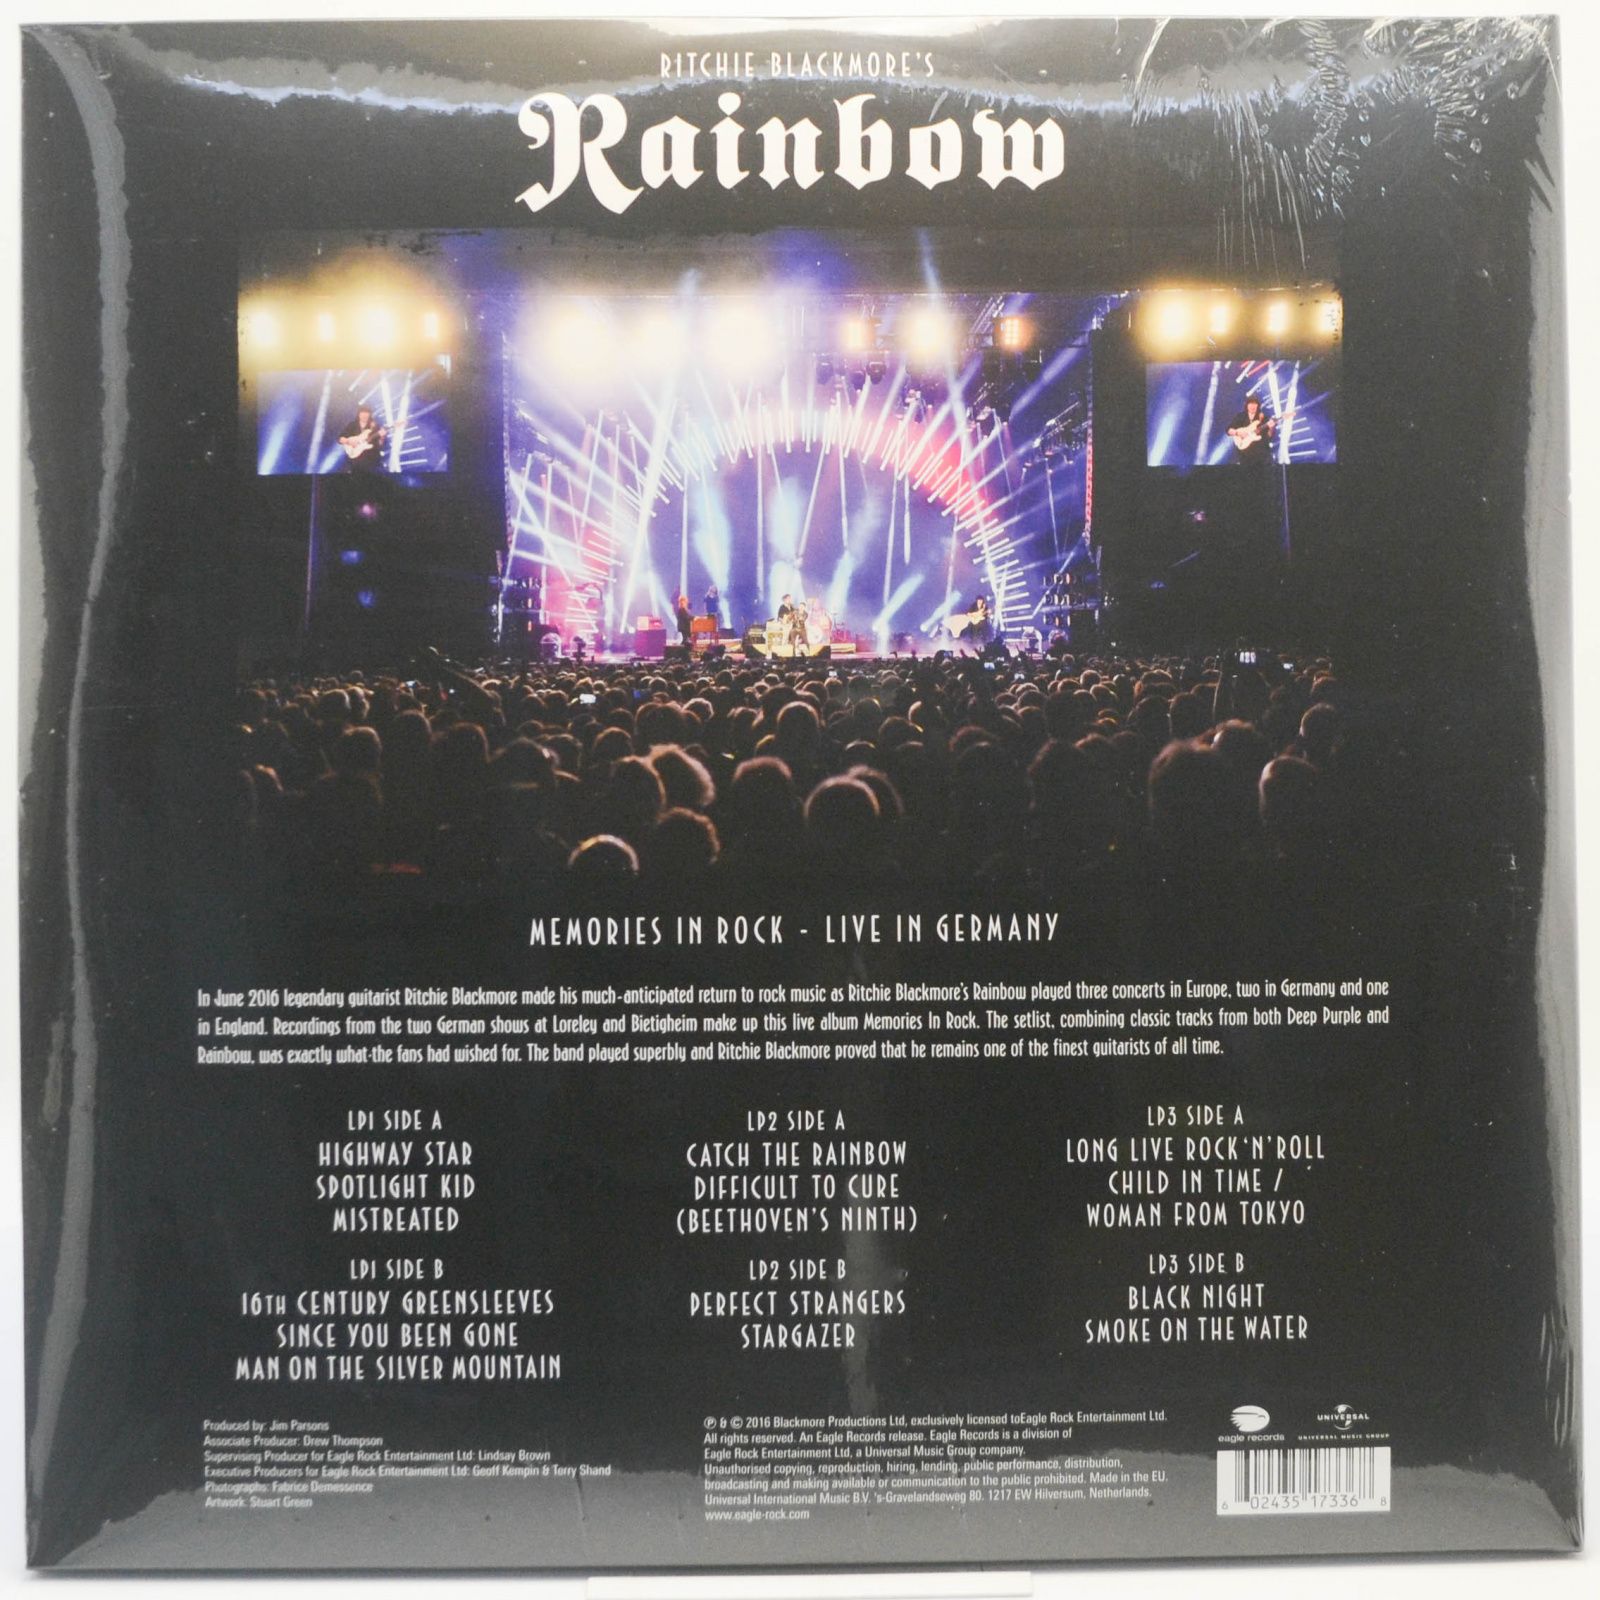 Ritchie Blackmore's Rainbow — Memories In Rock - Live In Germany (3LP), 2020